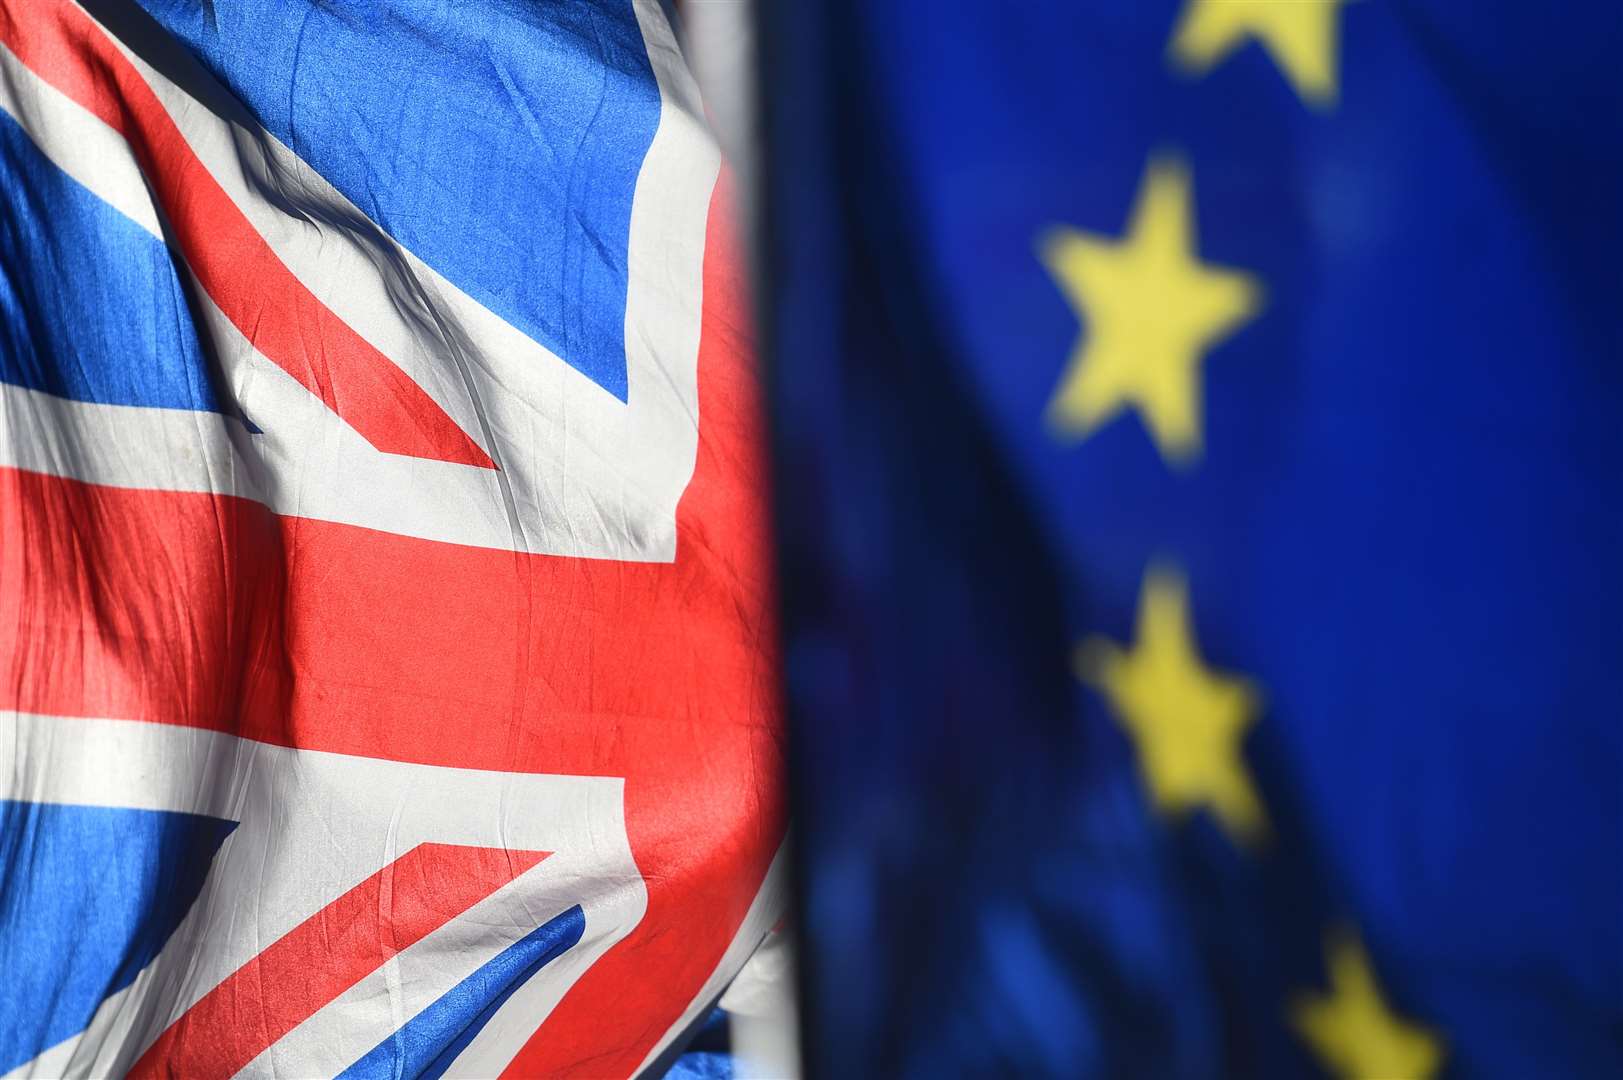 Brexit Barometer results reveal a shift in confidence for the UK economy